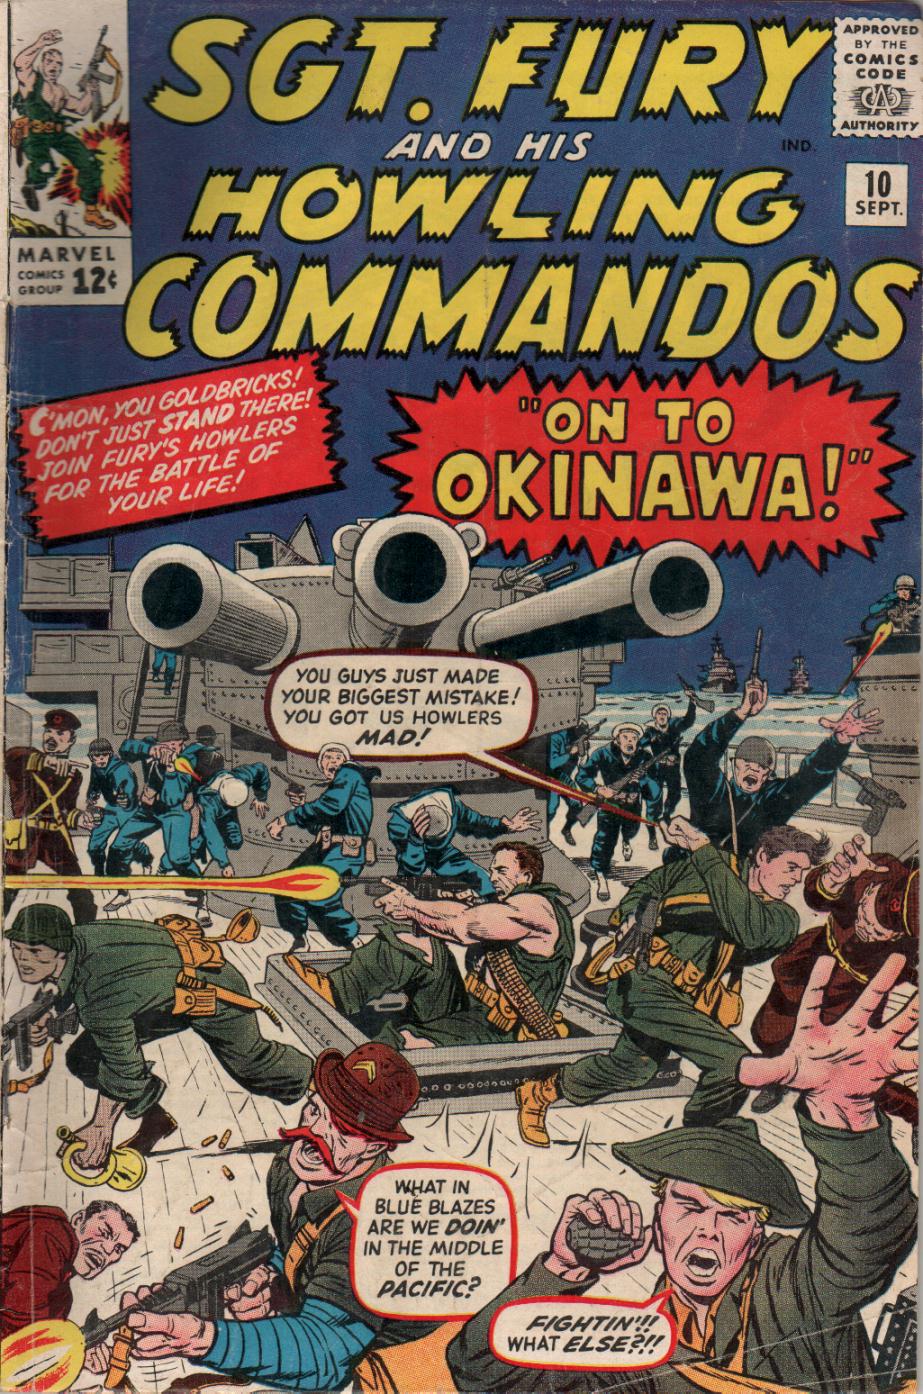 Sgt Fury and his Howling Commandos Vol. 1 #10